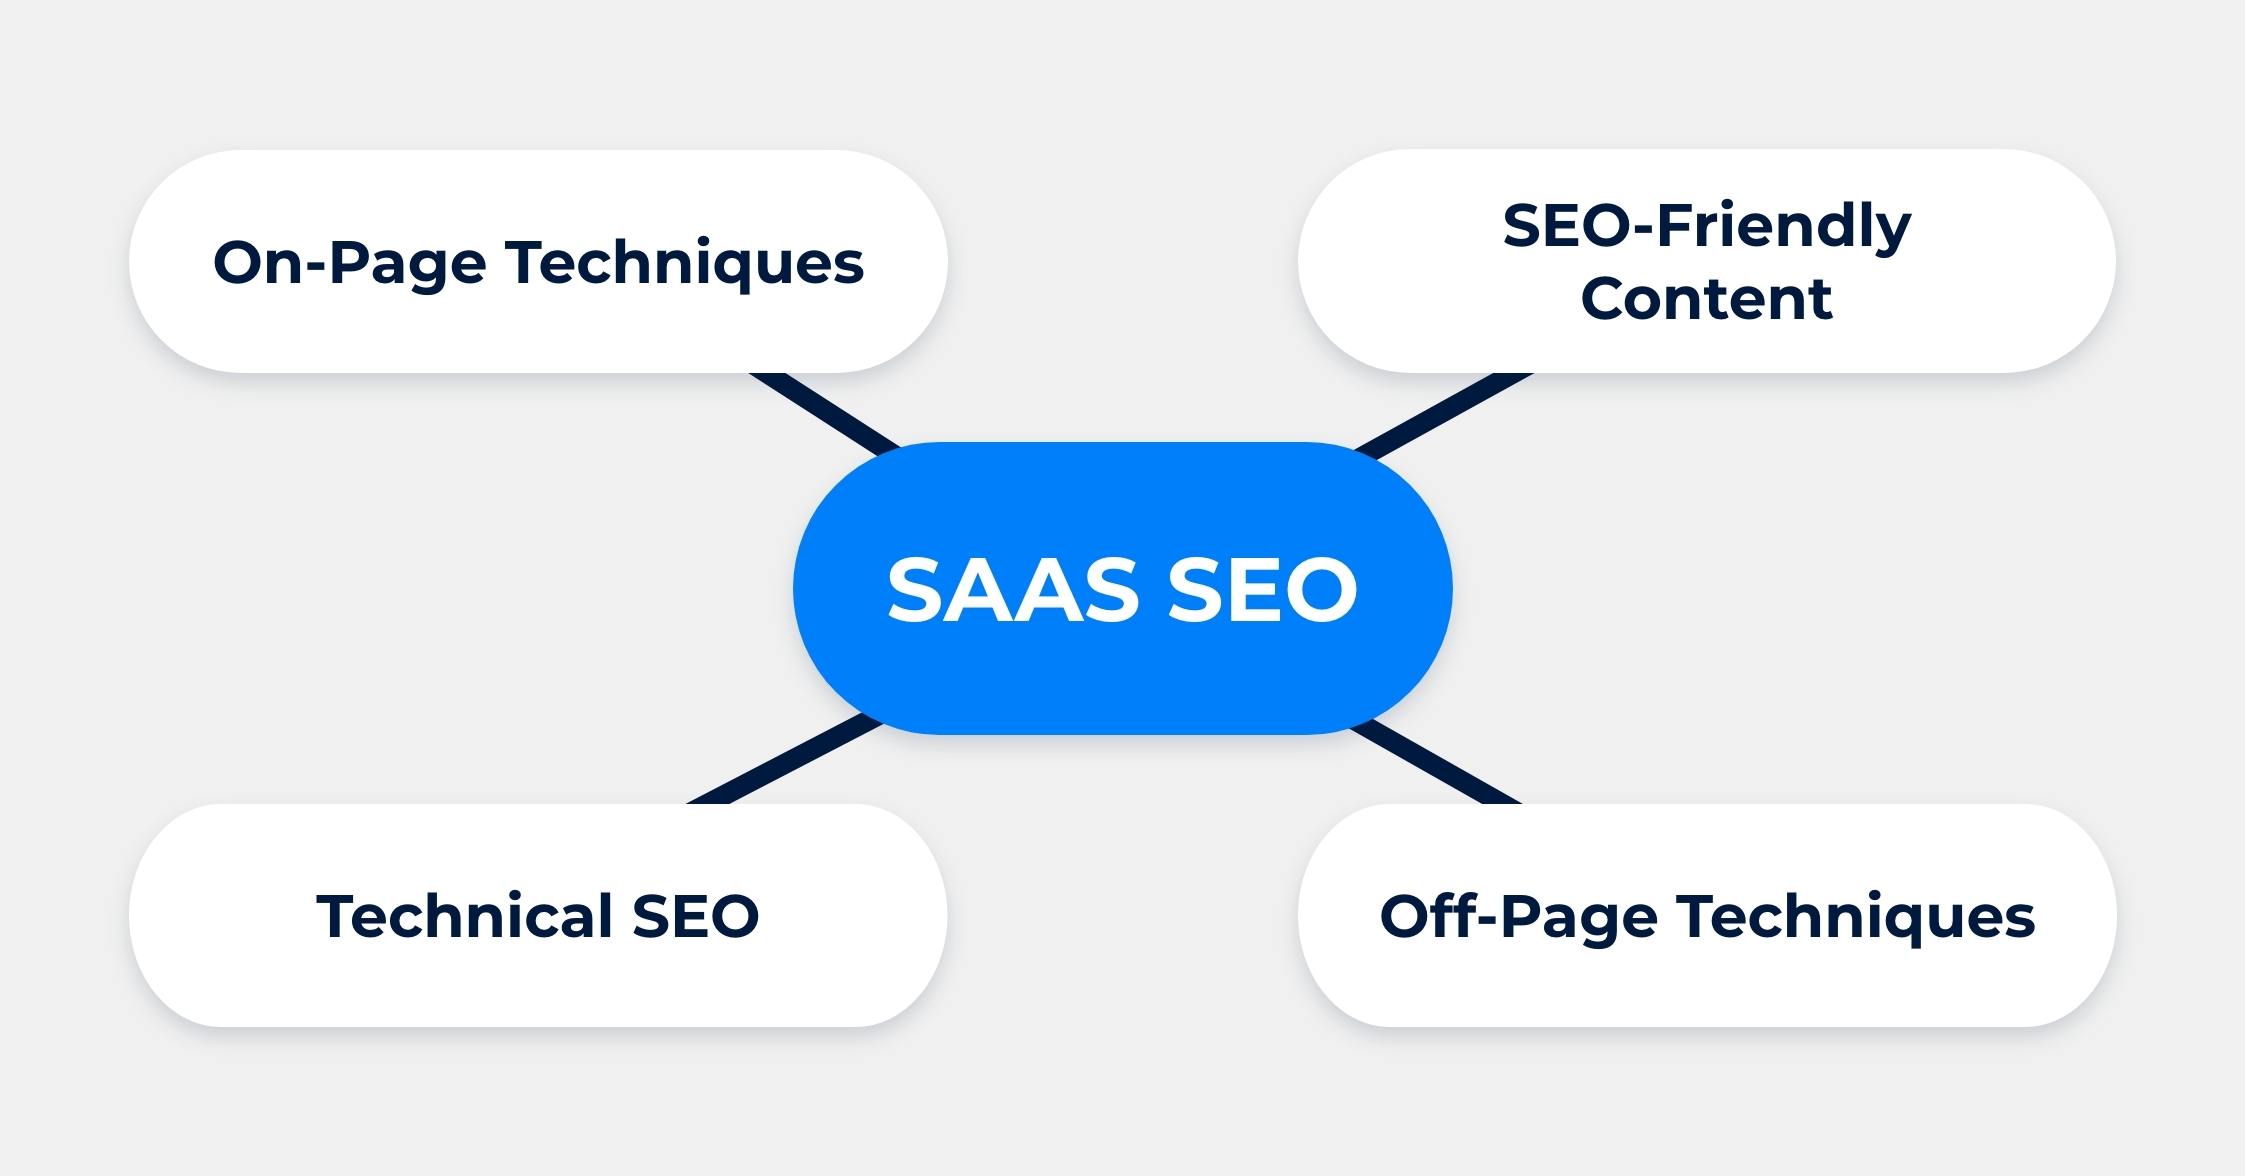 SaaS SEO strategies include on-page techniques, seo-friendly content, technical SEO, and off-page techniques.